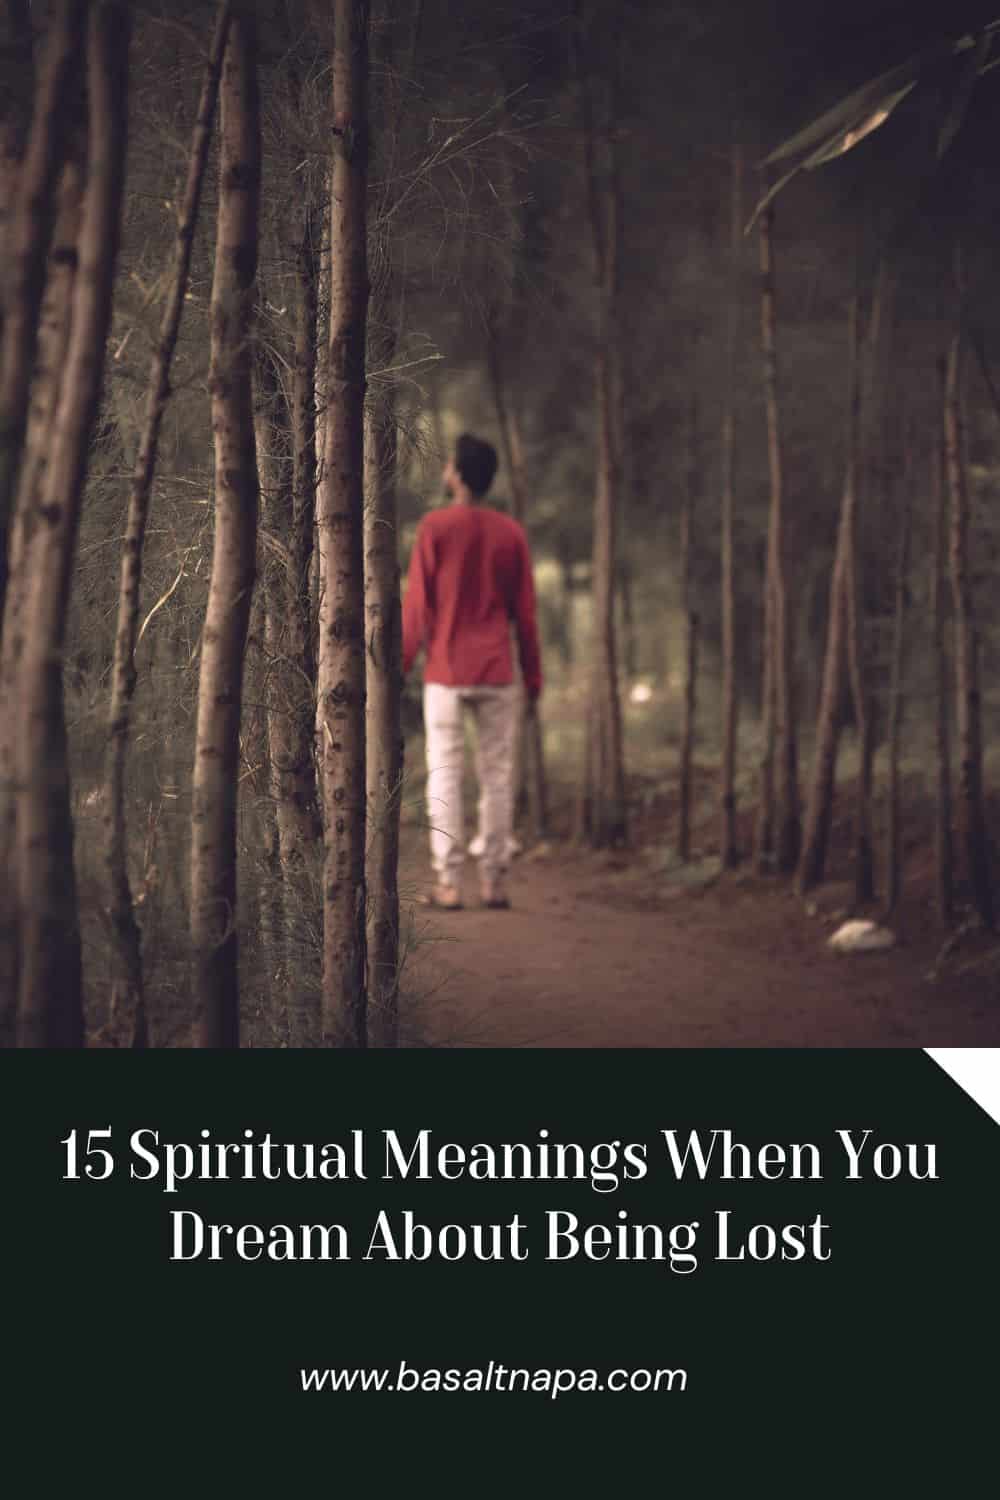 15 Spiritual Meanings When You Dream About Being Lost